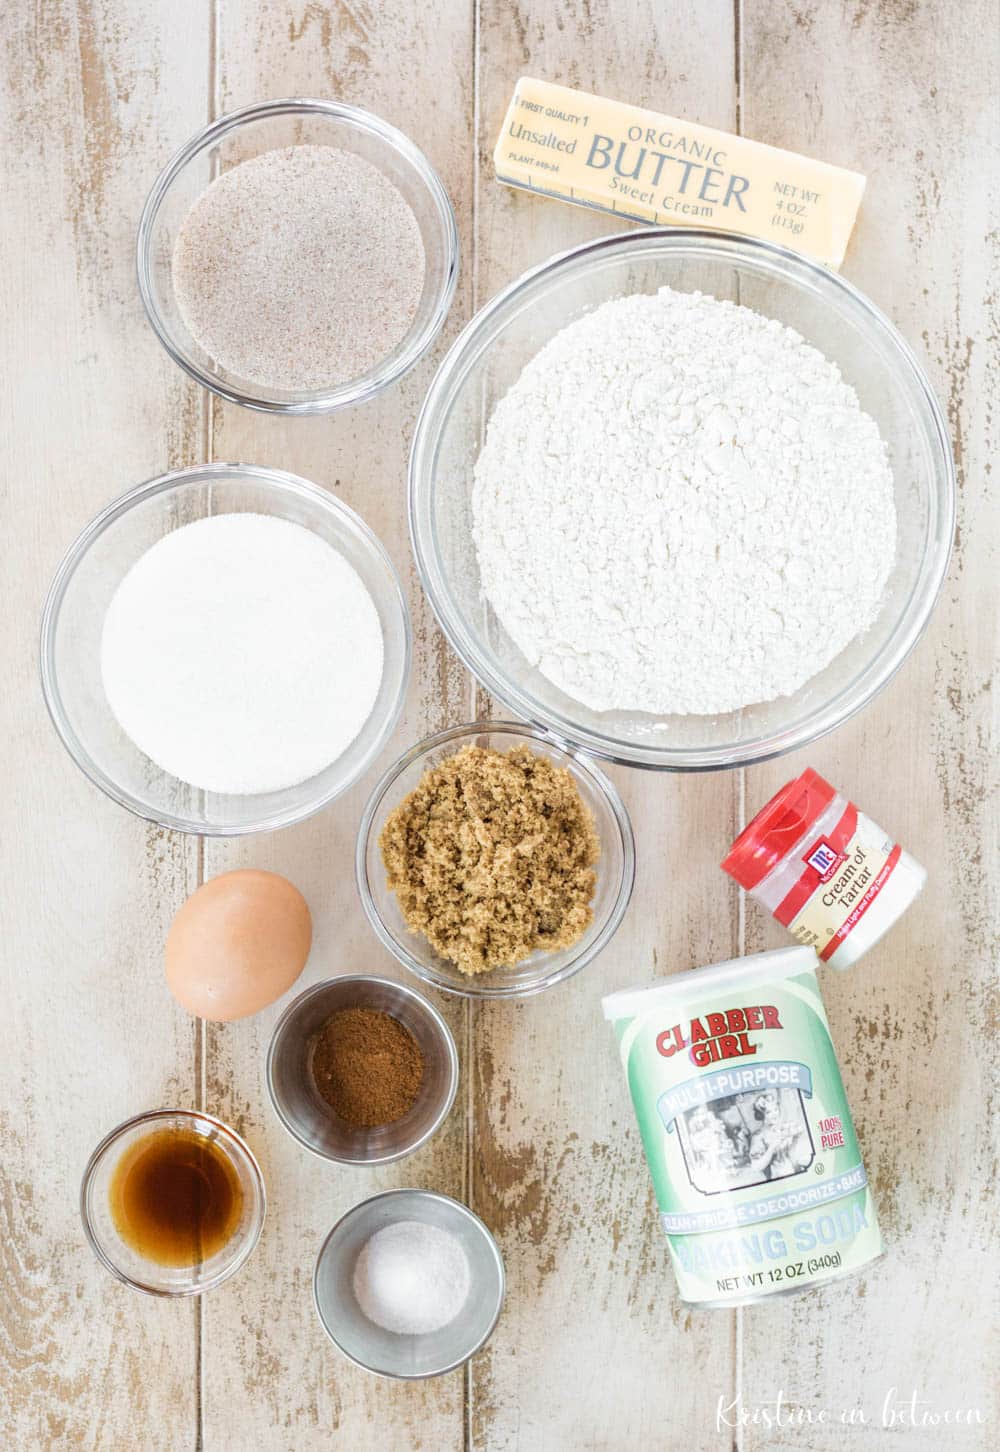 Ingredients needed to make this chewy snickerdoodle recipe.